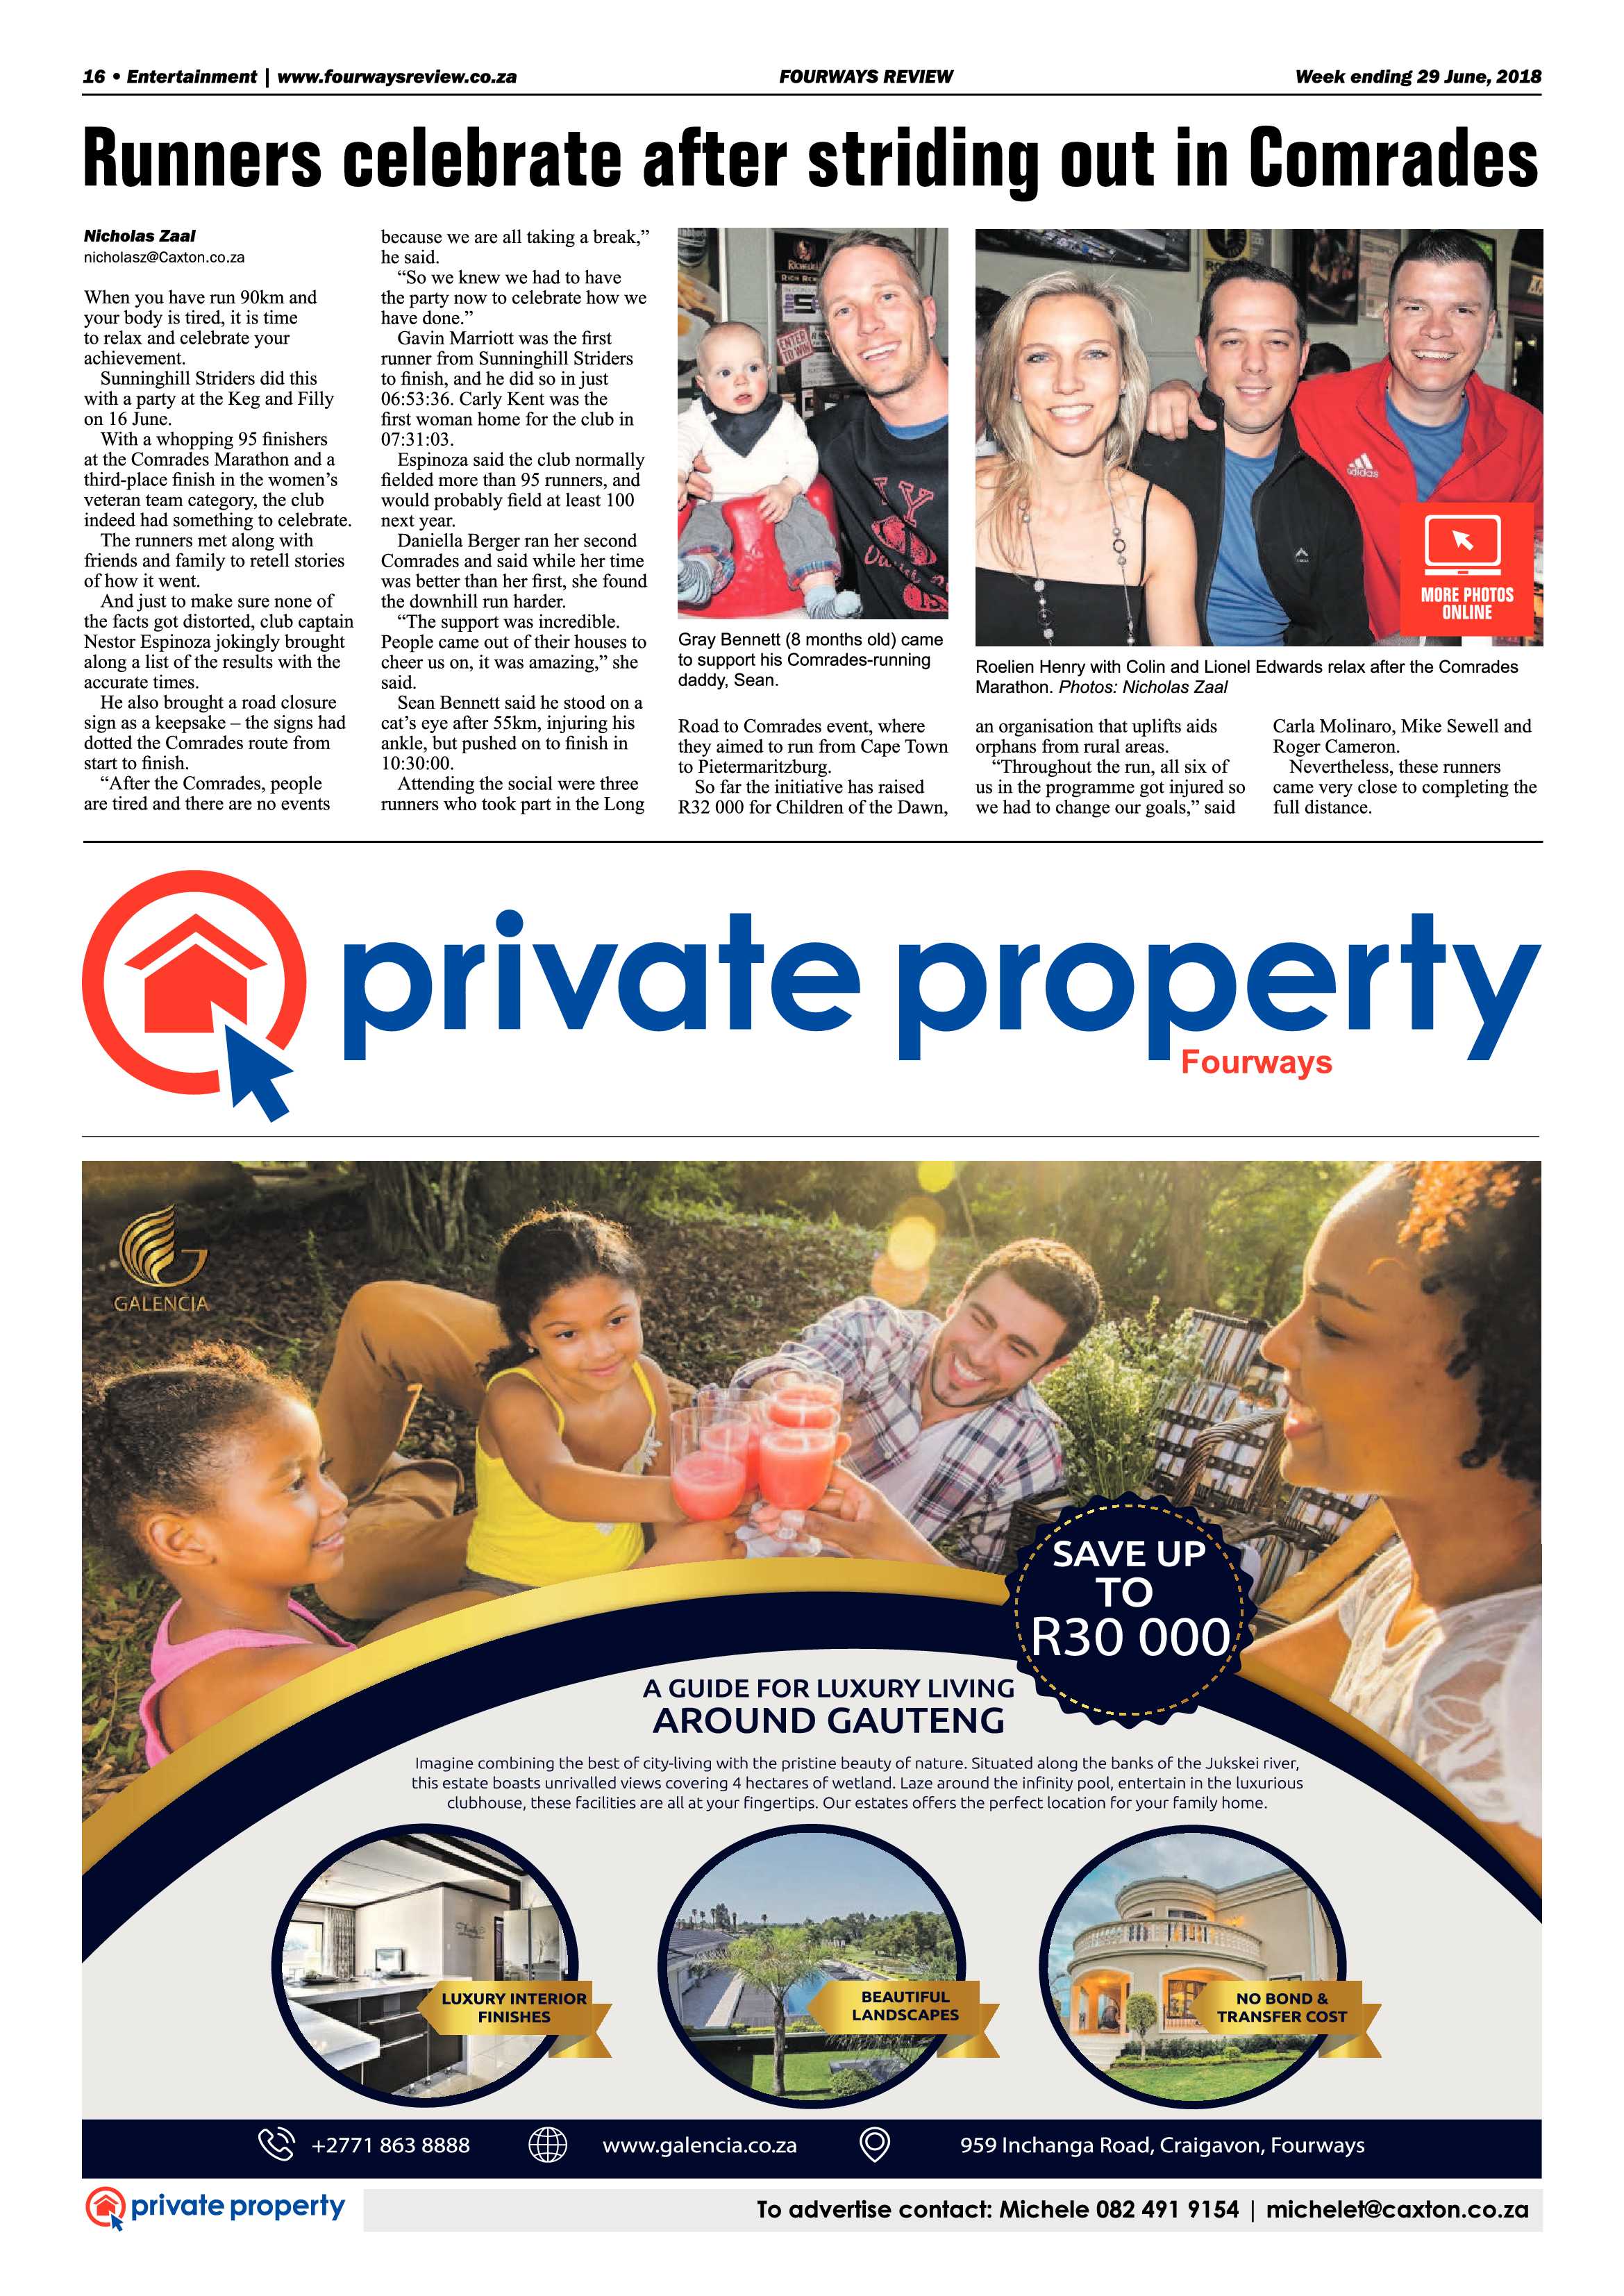 Fourways Review 29 June, 2018 page 16